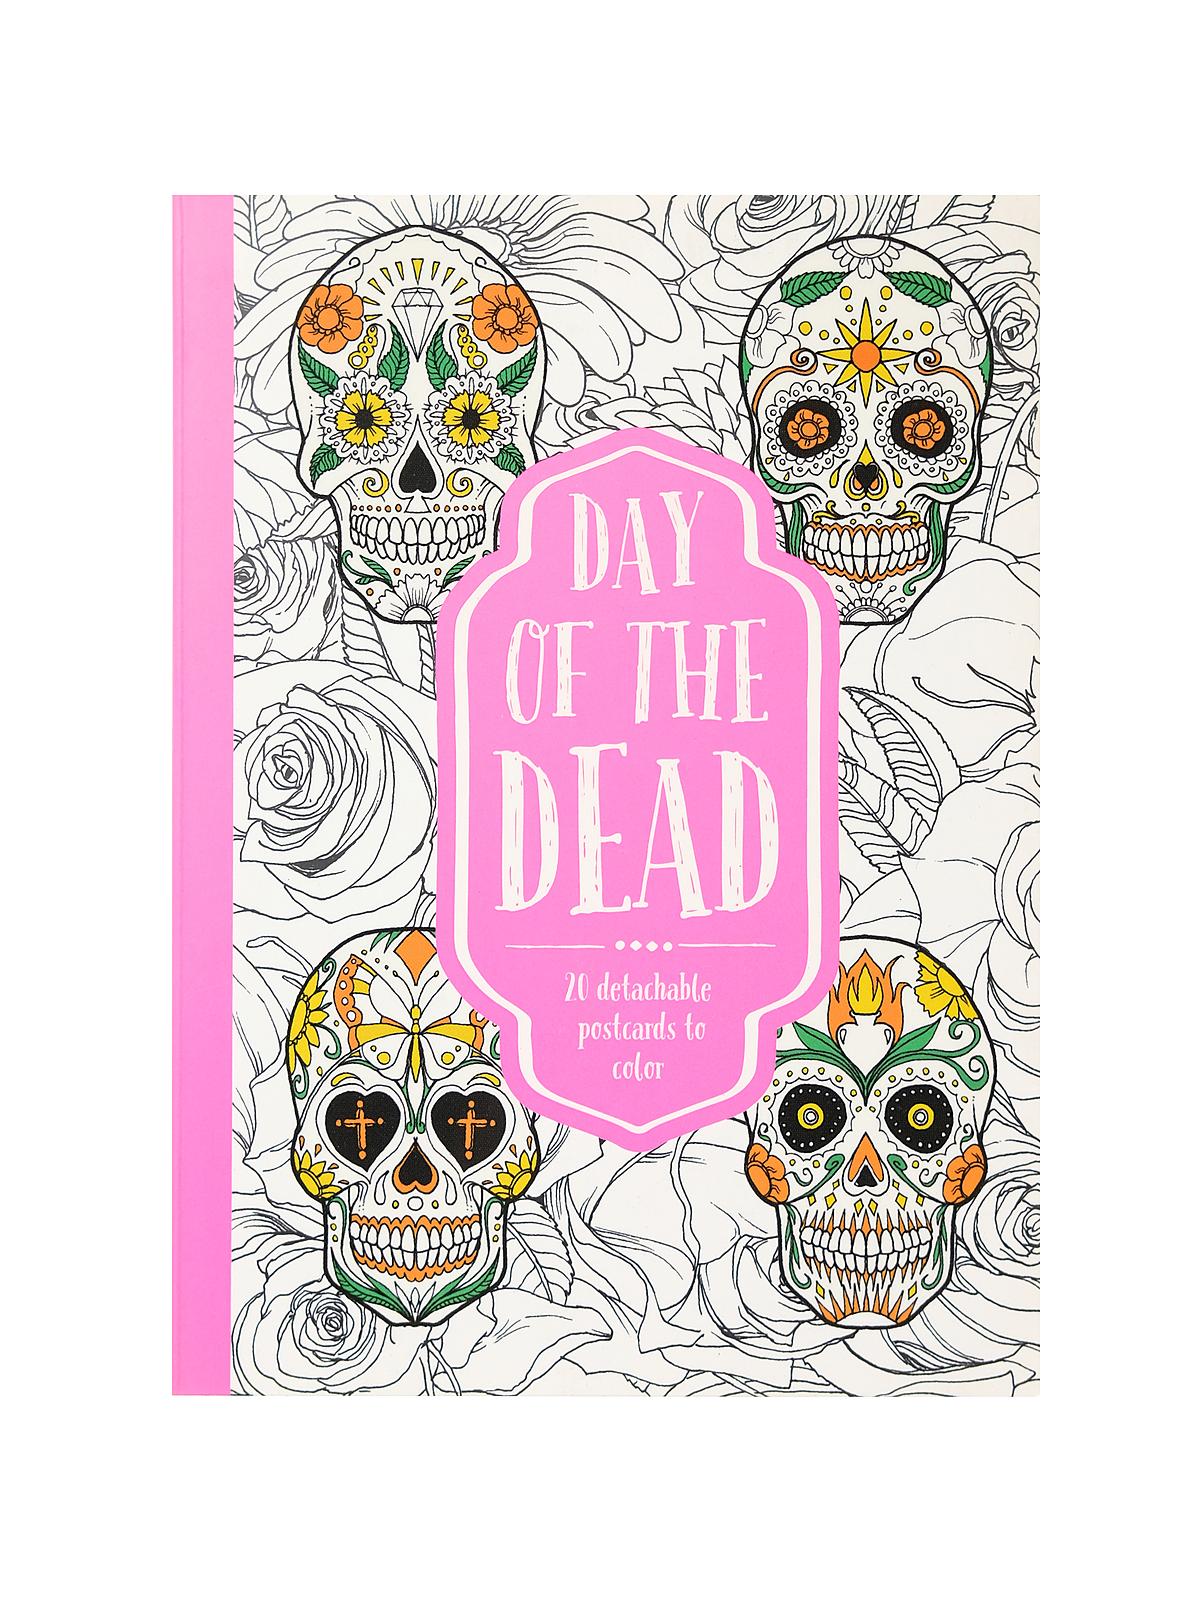 Day Of The Dead Postcards Each